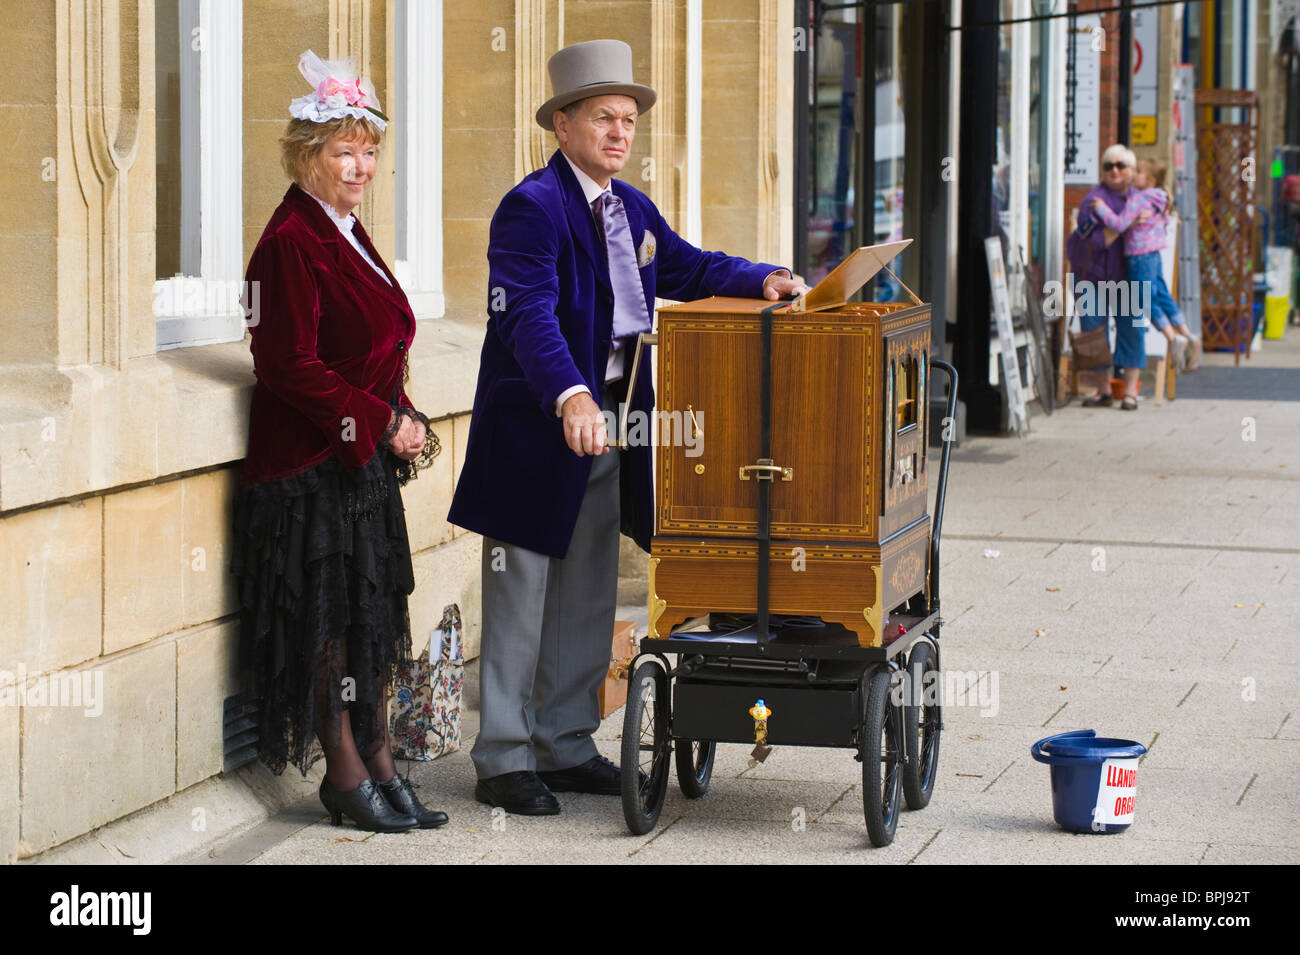 Organ grinders in period costume playing street organs at the Victorian Festival in Llandrindod Wells Powys Mid Wales UK Stock Photo